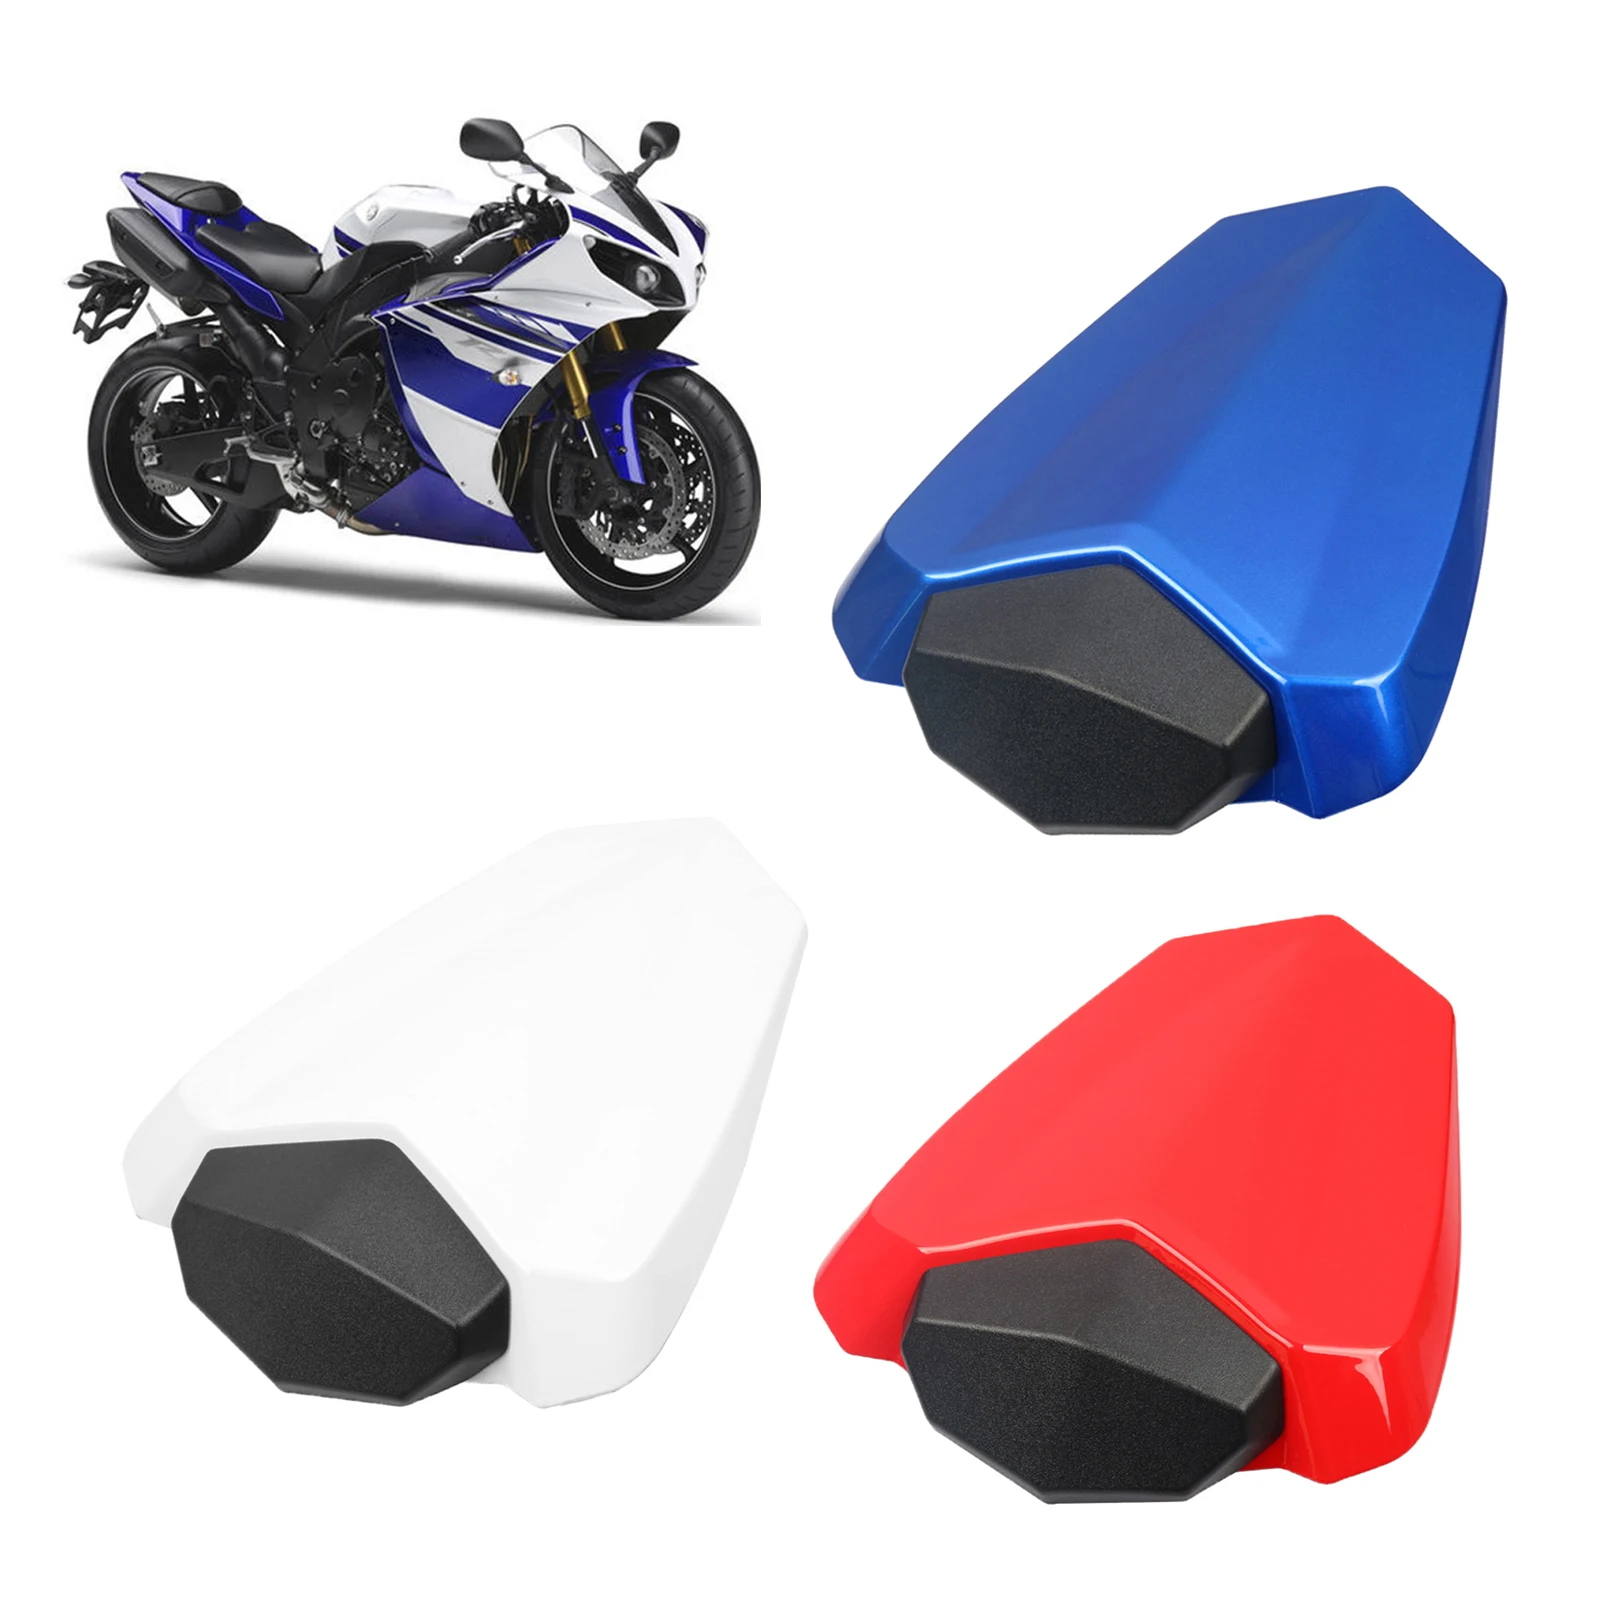 Rear Passenger Pillion Seat Cowl Fairing Cover Compatible For Yamaha YZF R1 2009-2014 2010 2011 2012 2013